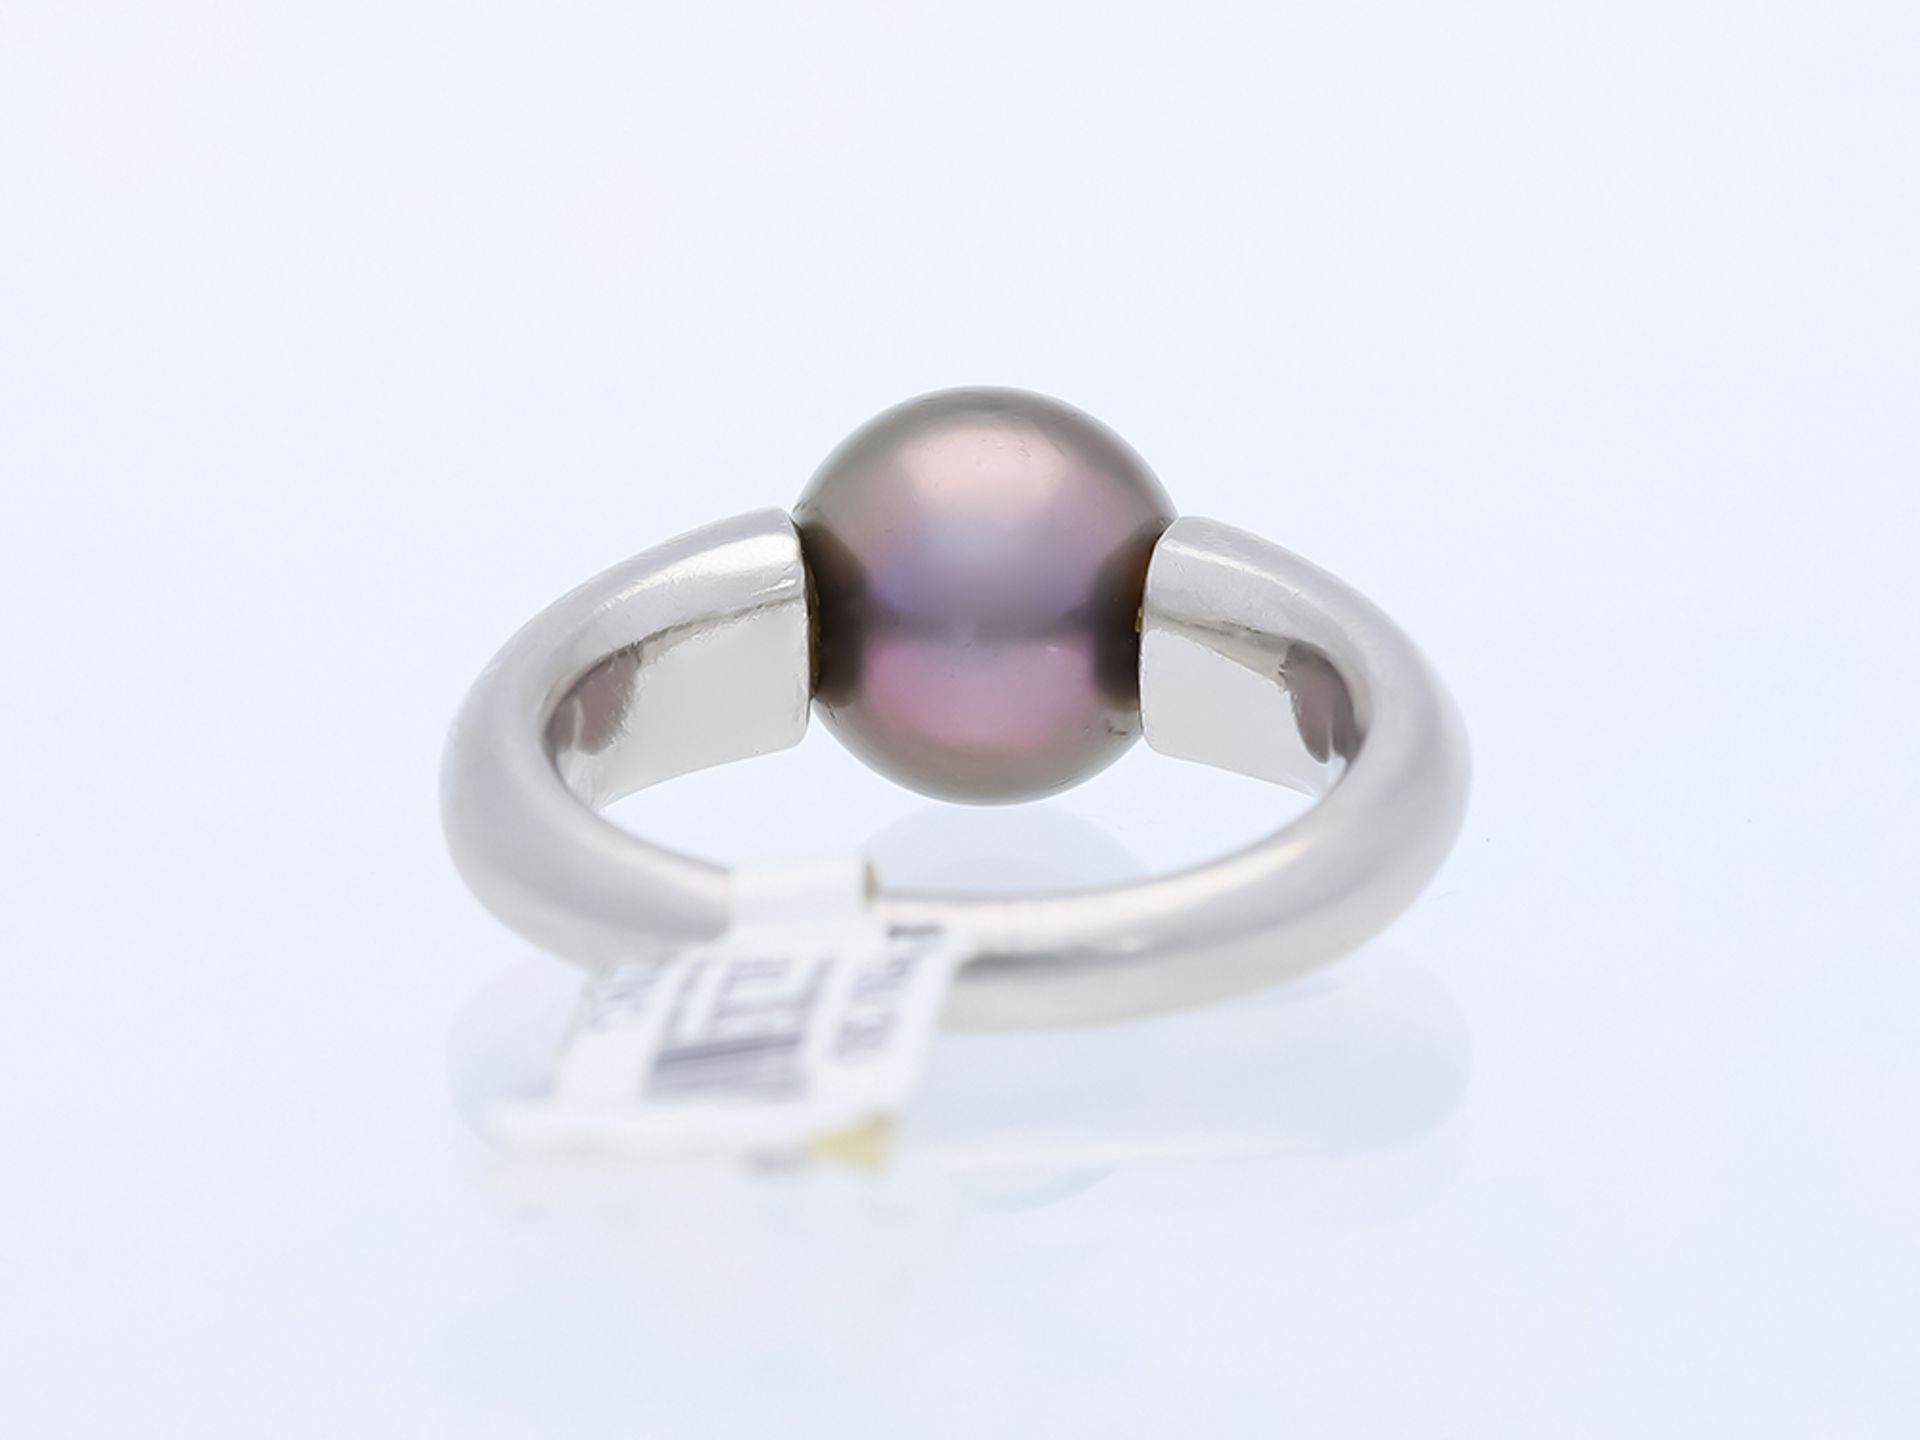 Ring with Tahitian cultured pearl and diamonds in 950 platinum, signed "BUNDA" - Image 3 of 6